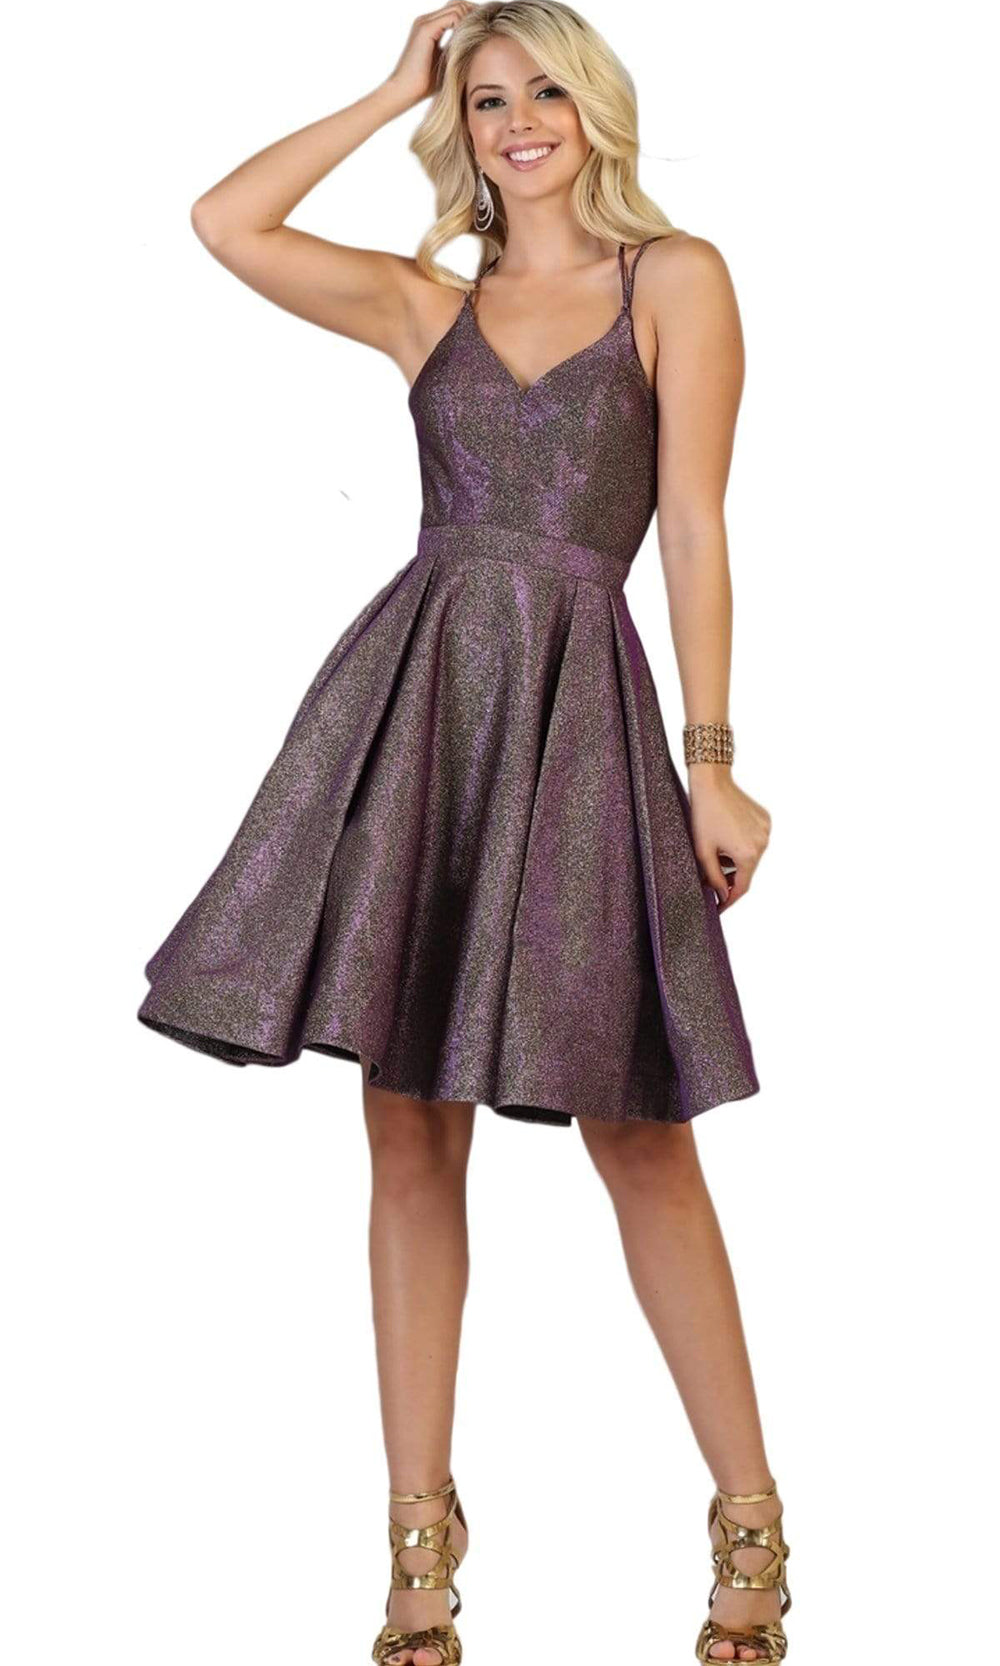 May Queen - Sleeveless Pleated Short Dress RQ7750SC In Purple